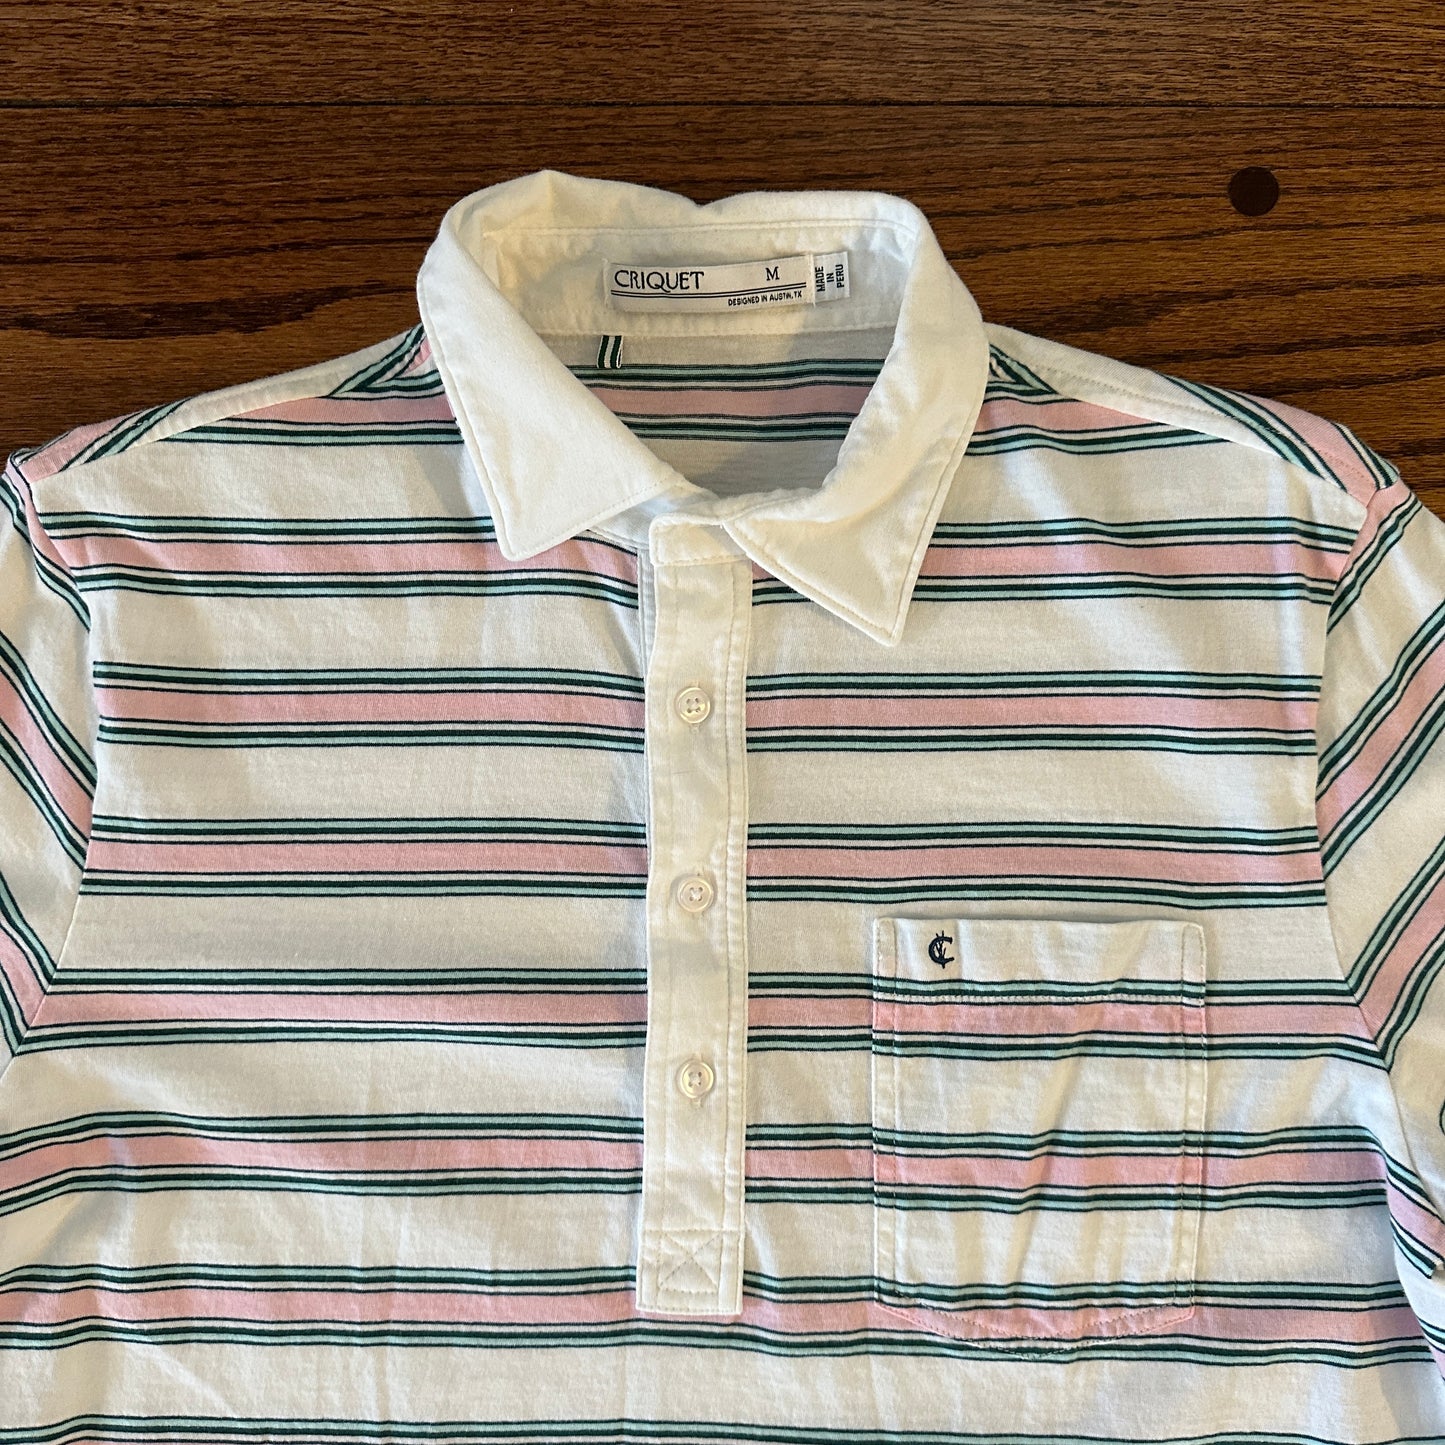 Men's Criquet Polo, White and Pink Striped - size M